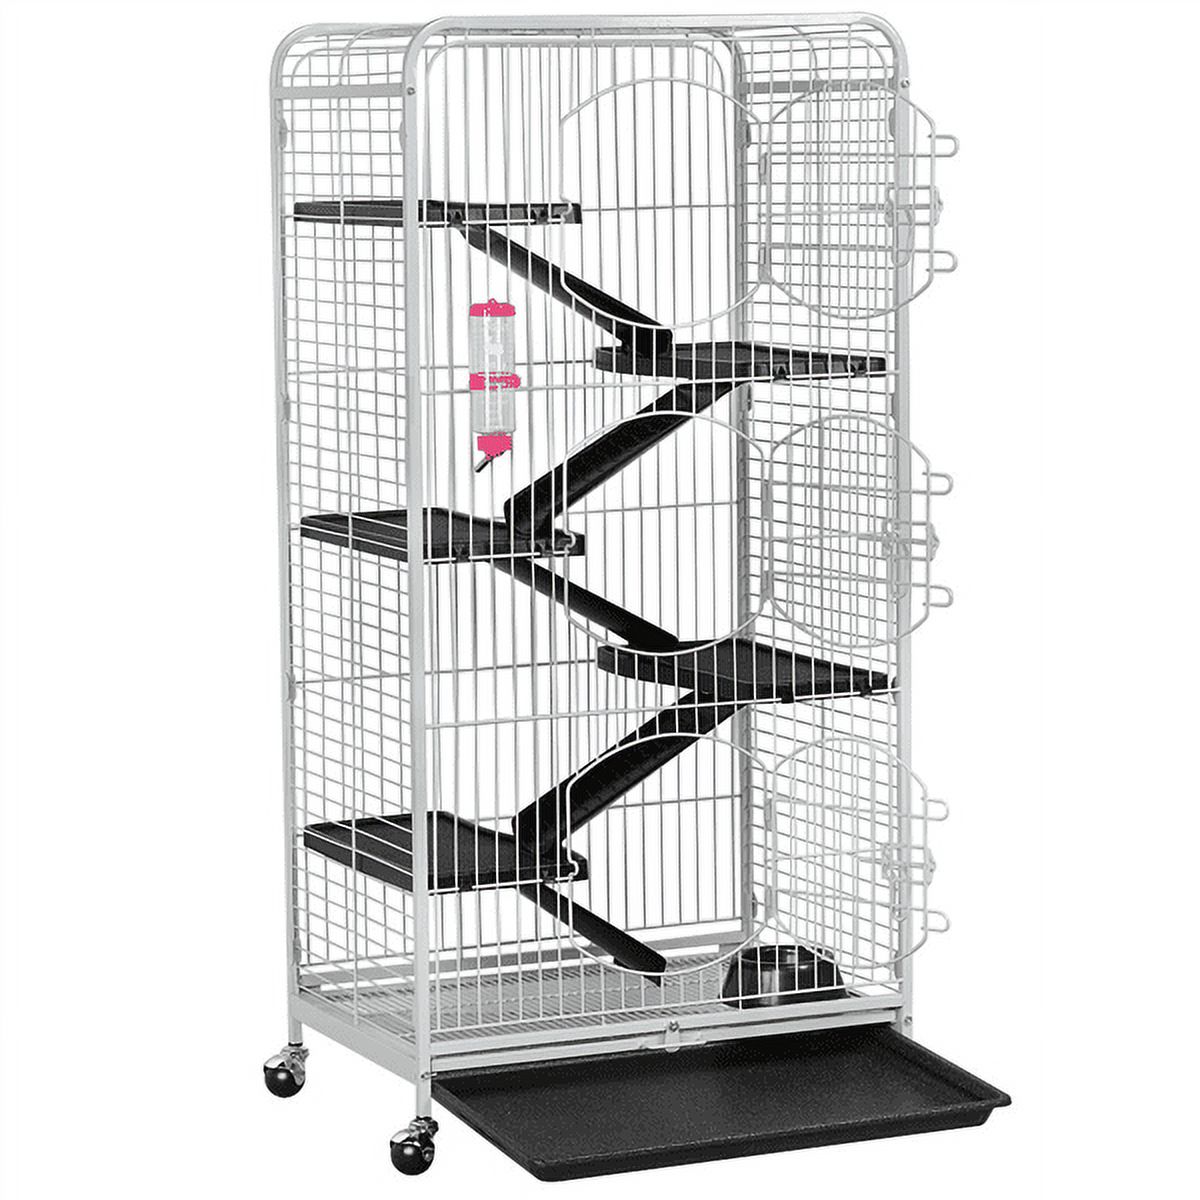 Alden Design 6 Level Rolling Large Pet Cage with 3 Doors, Pet Bowl, and Water Bottle for Small Animals, White - image 4 of 9